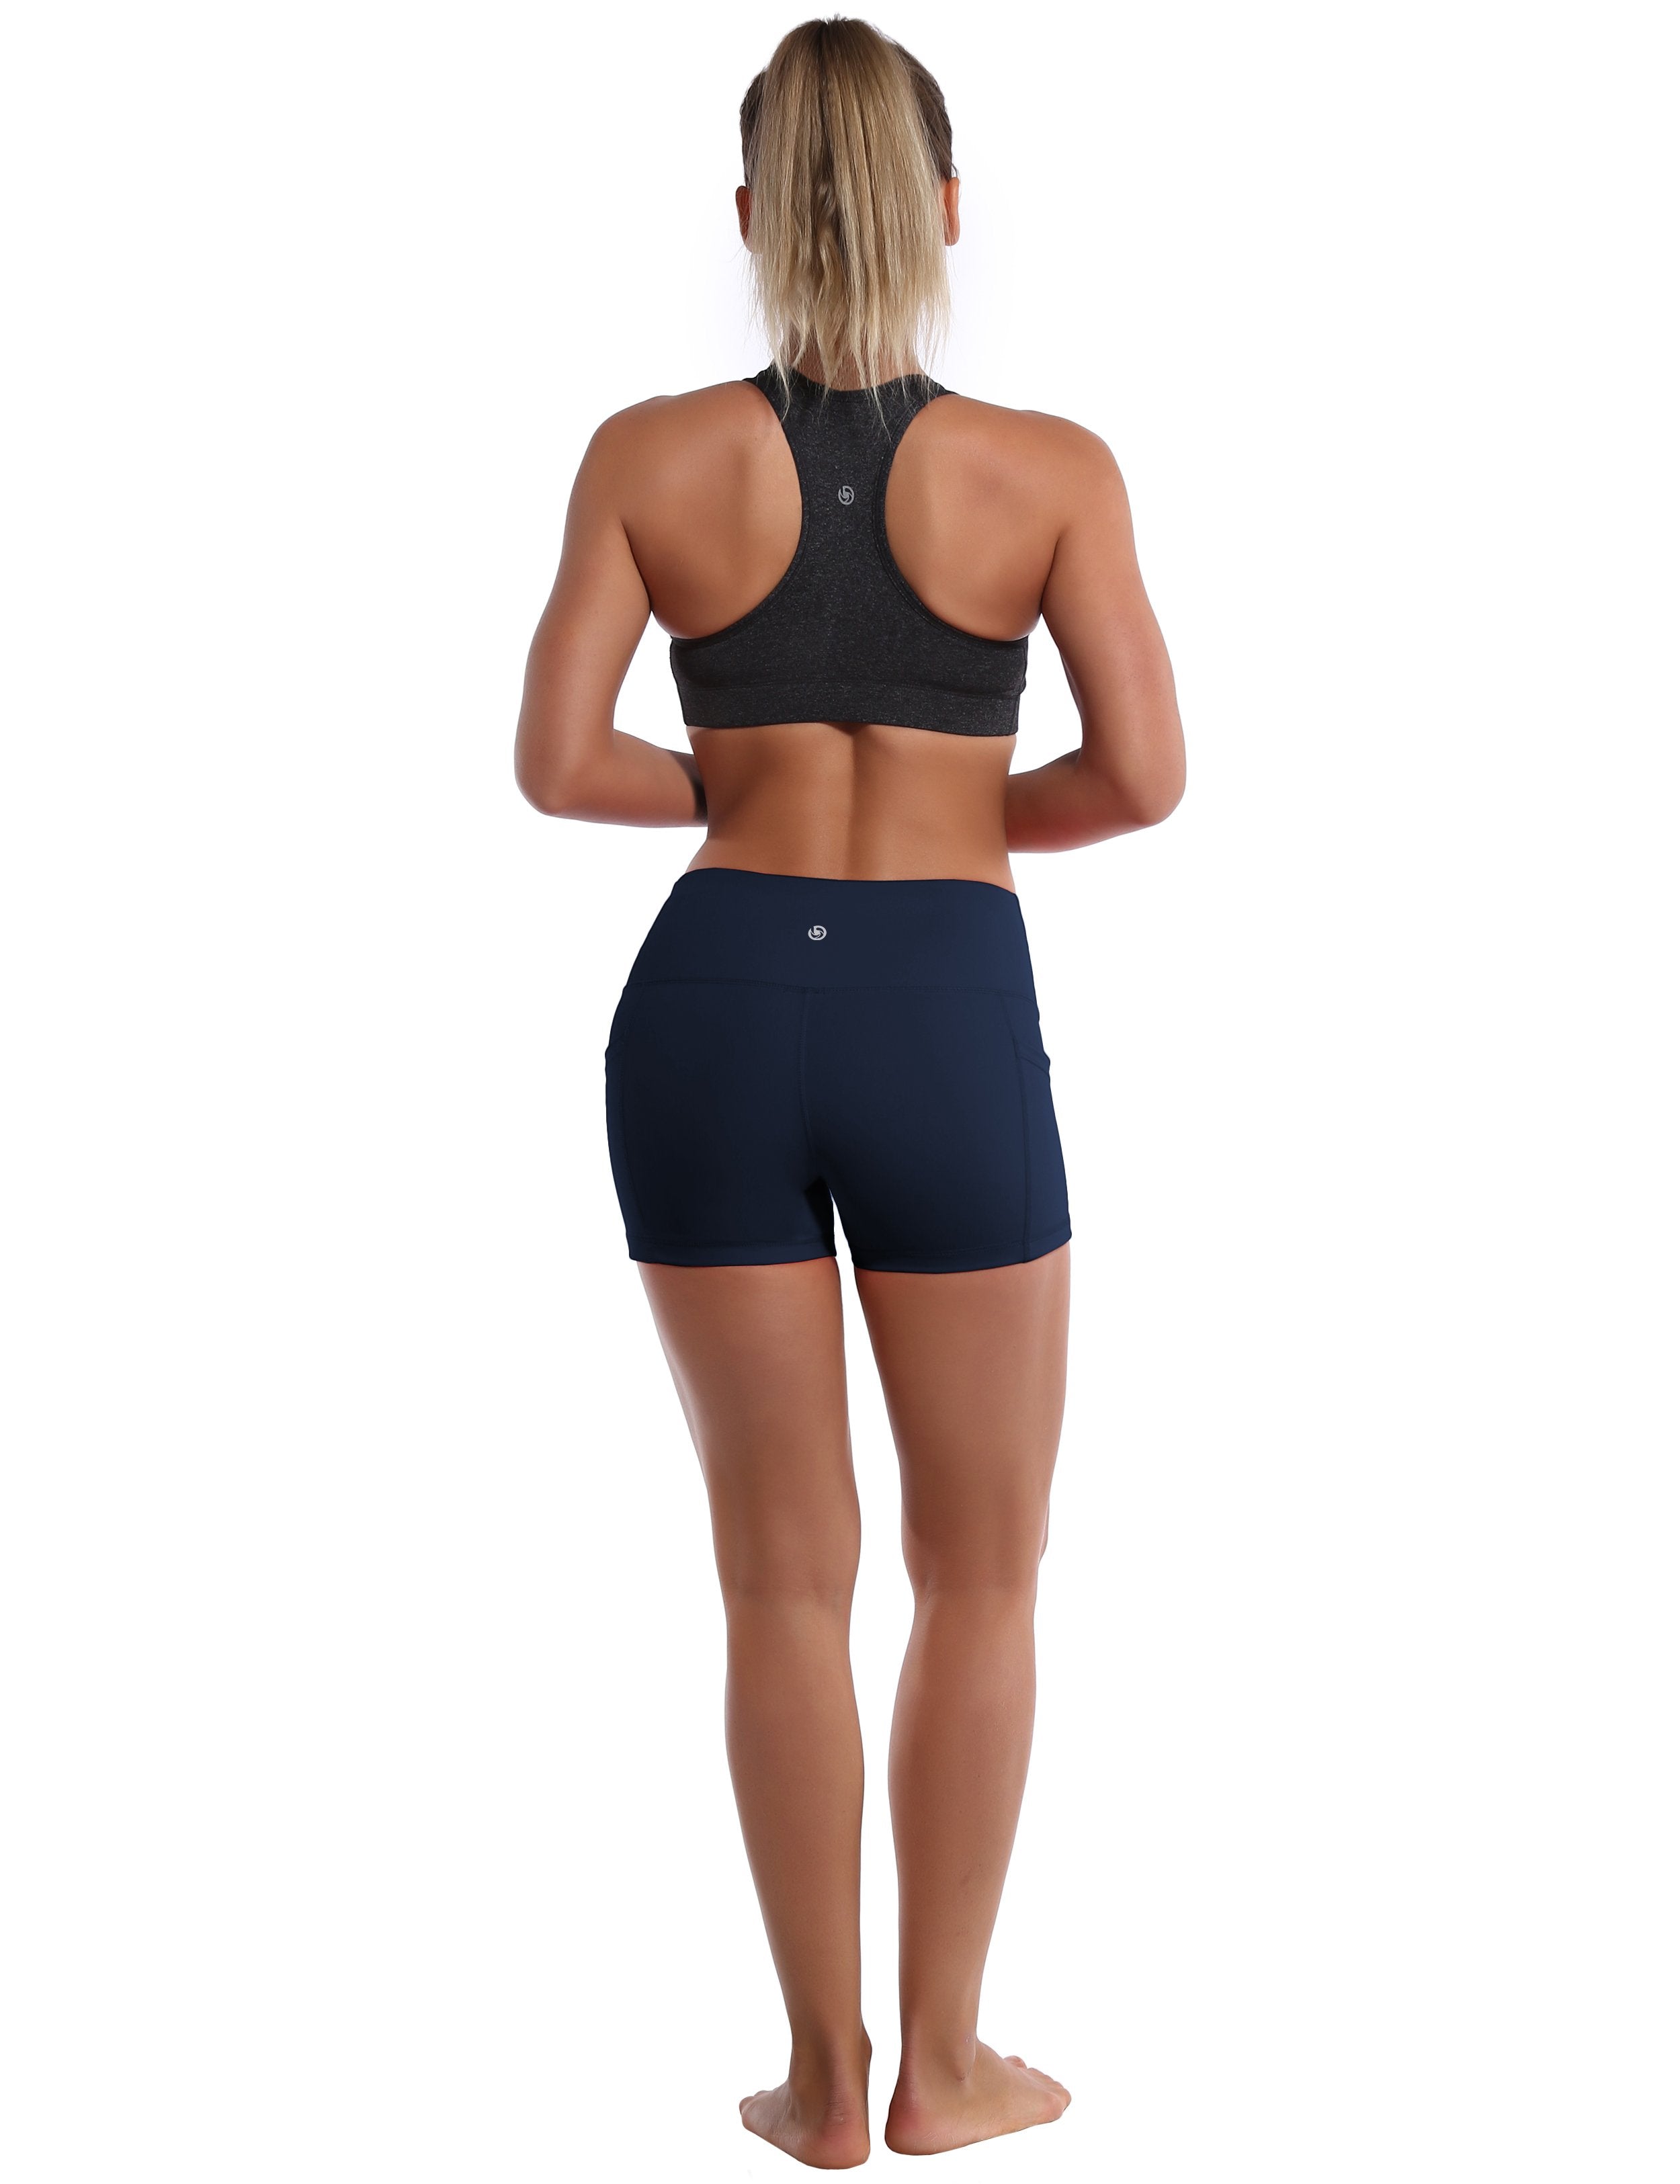 2.5" Side Pockets Running Shorts darknavy Sleek, soft, smooth and totally comfortable: our newest sexy style is here. Softest-ever fabric High elasticity High density 4-way stretch Fabric doesn't attract lint easily No see-through Moisture-wicking Machine wash 78% Polyester, 22% Spandex